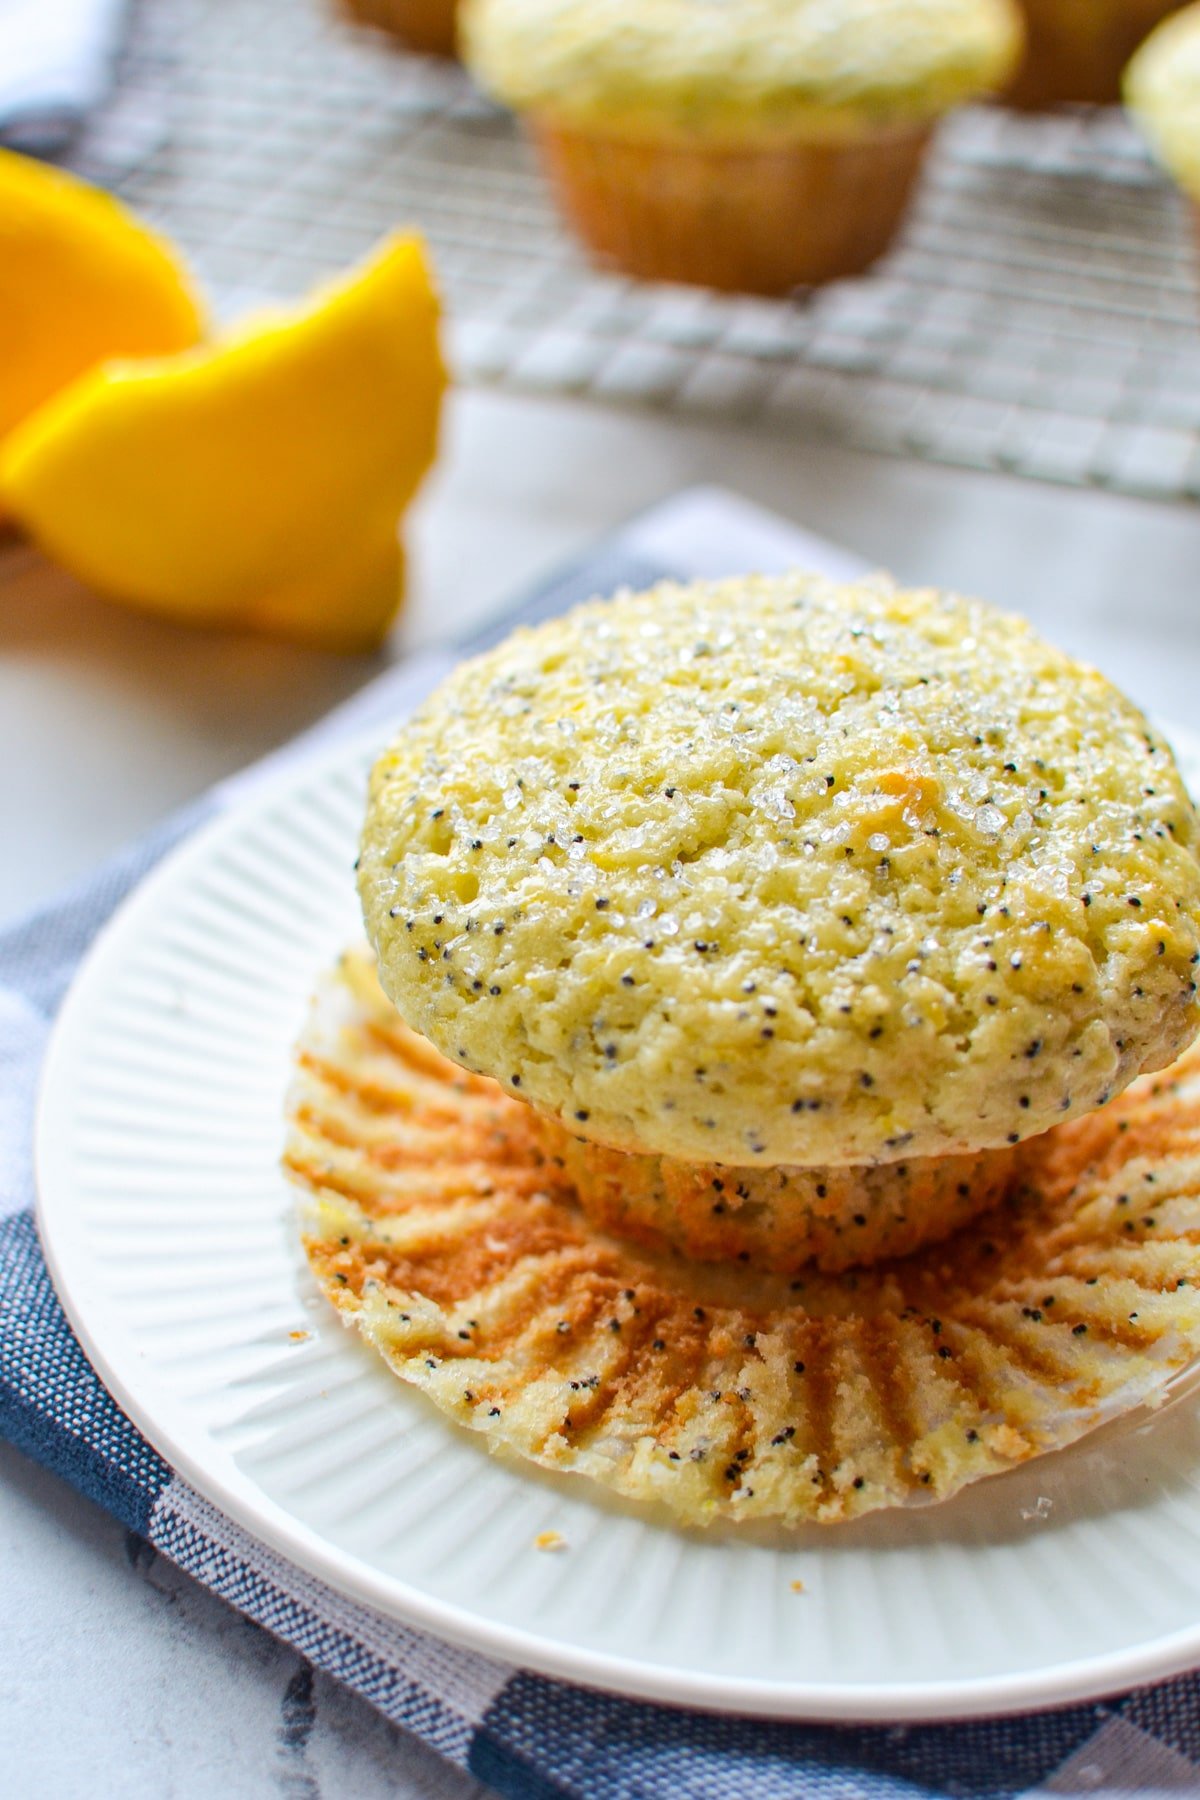 A close up of a lemon poppy seed muffin, unwrapped from its muffin liner on a plate.